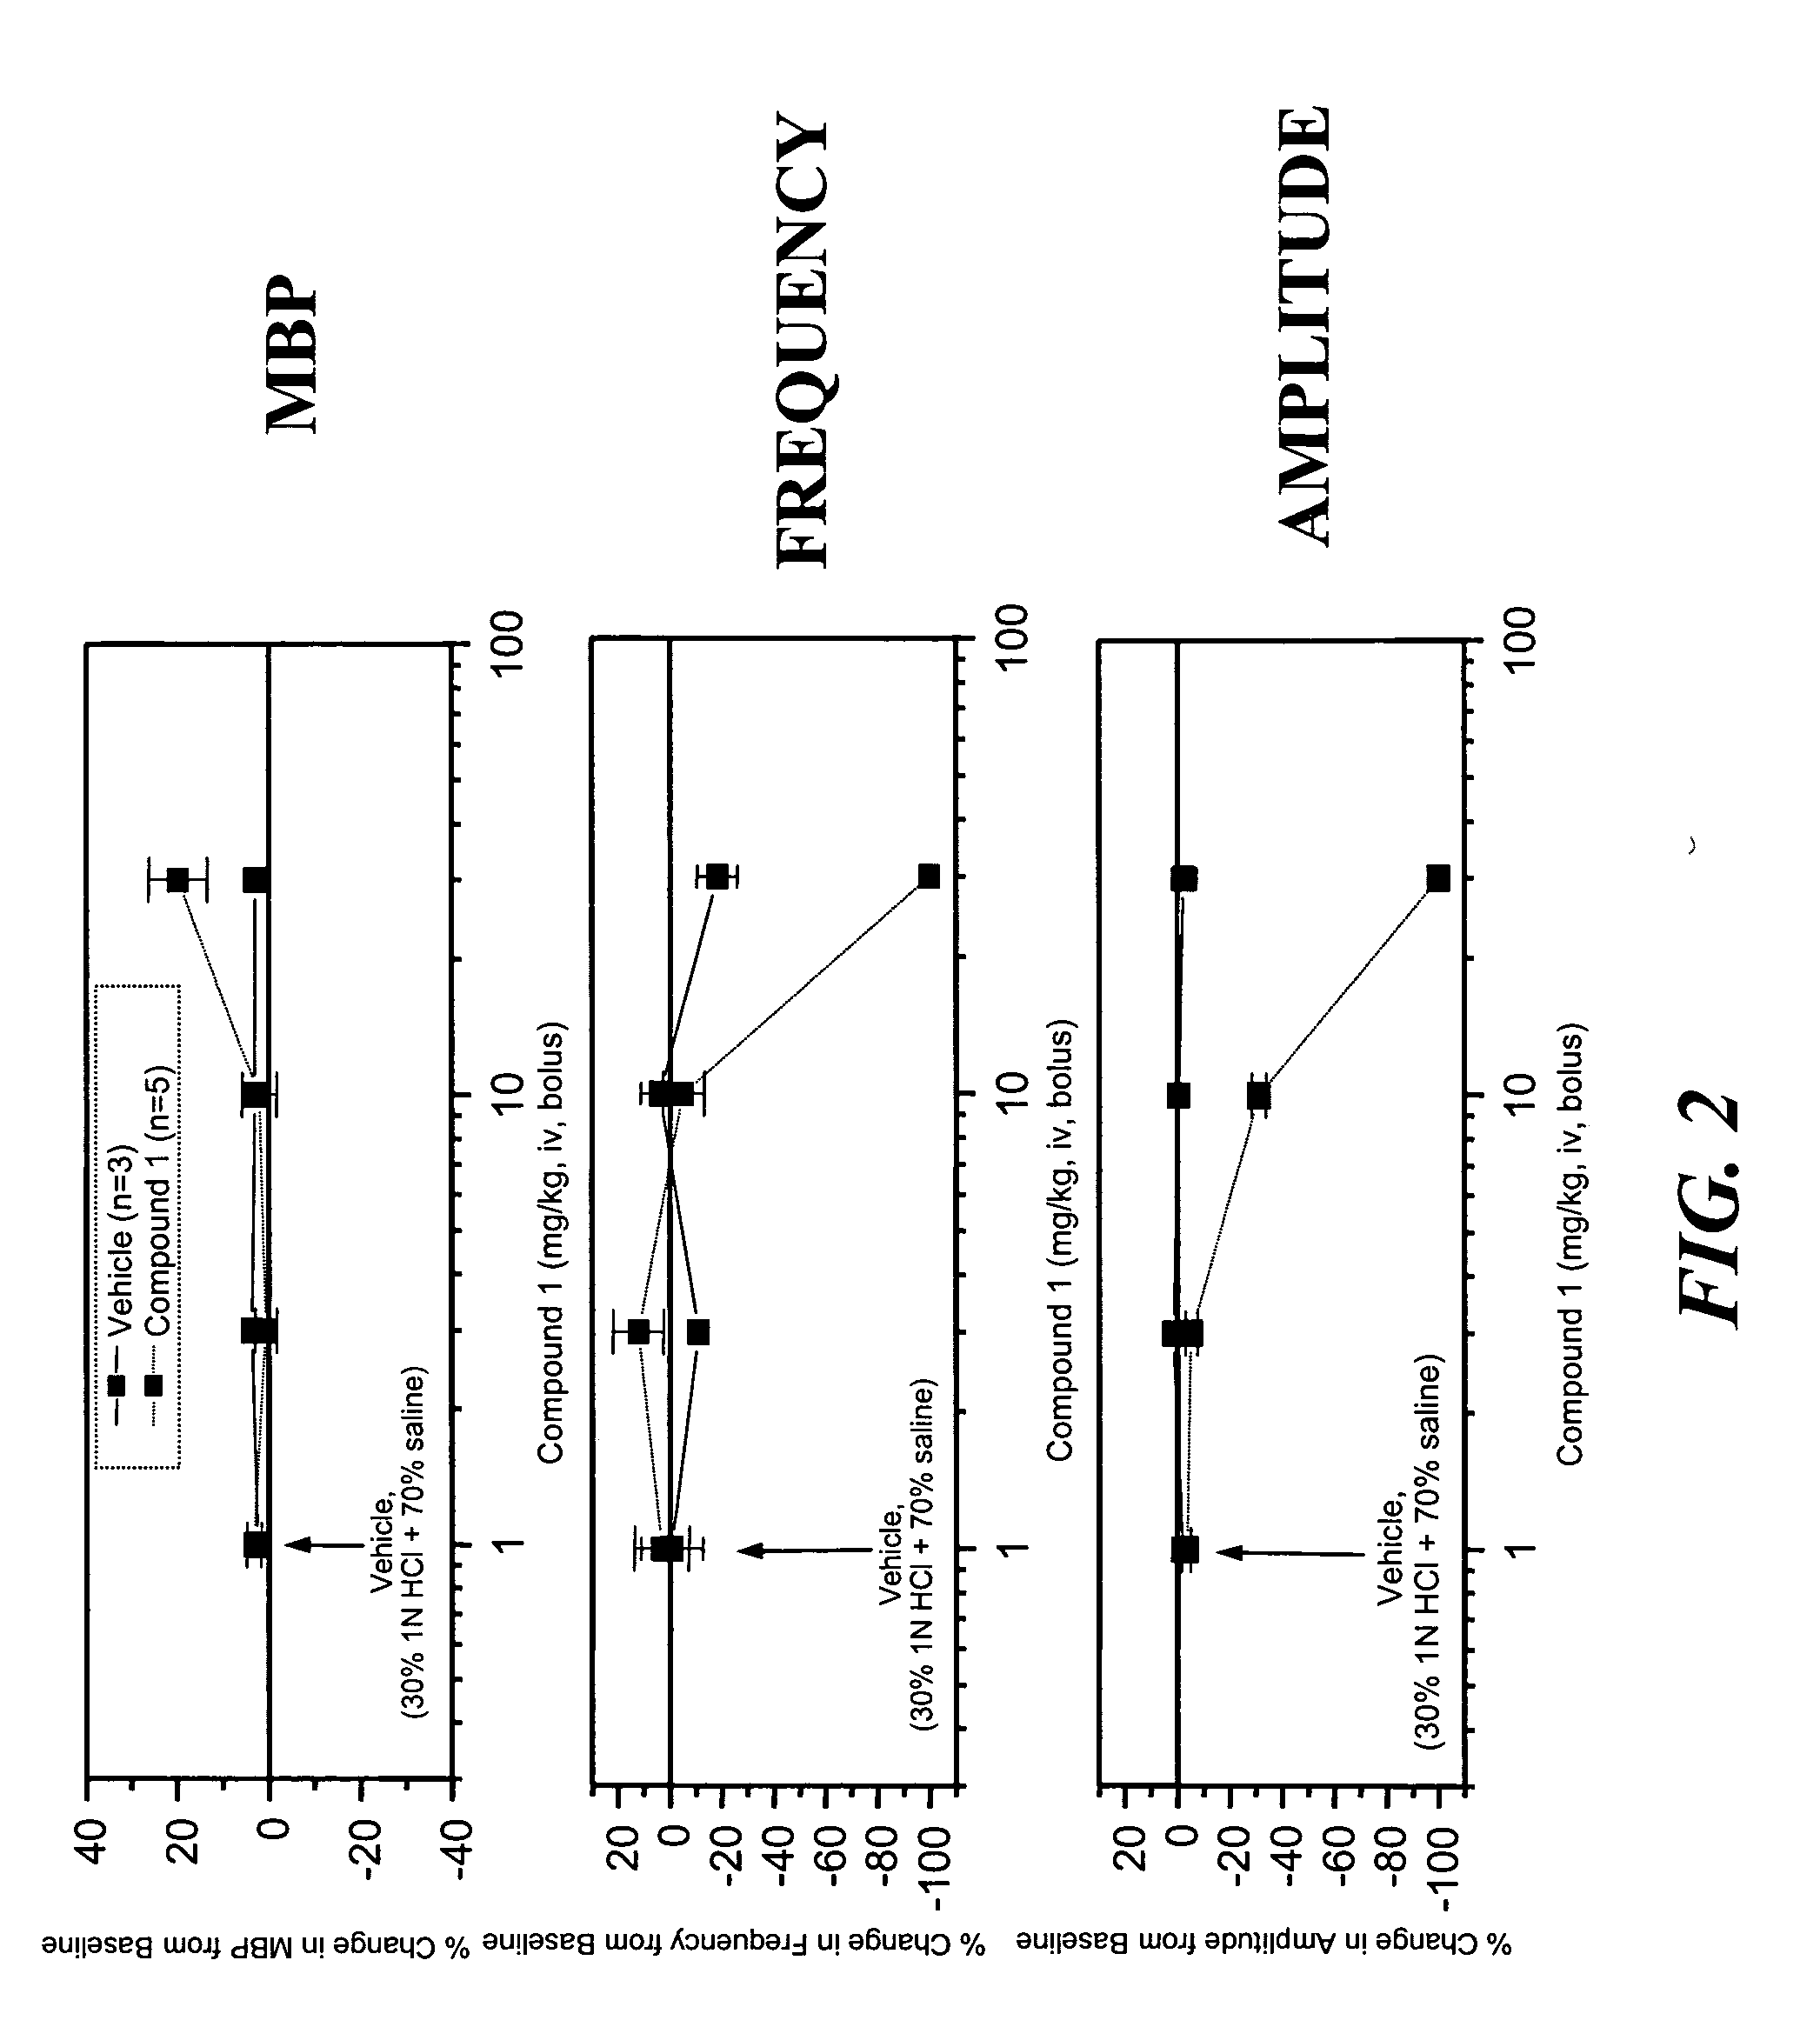 Methods of treating genitourinary disorders using inhibitors of soluble epoxide hydrolase